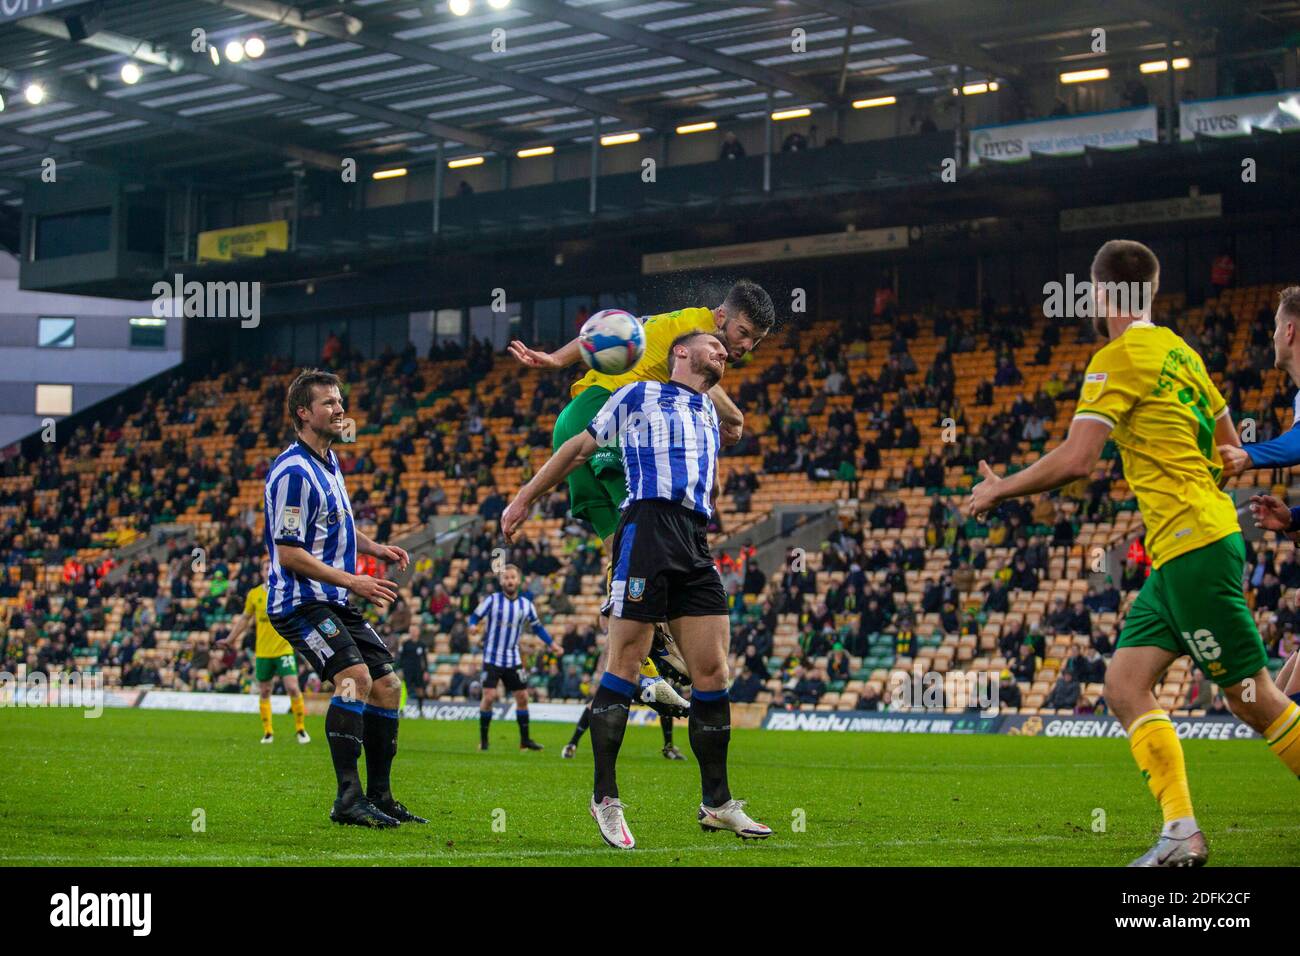 5th December 2020; Carrow Road, Norwich, Norfolk, England, English Football League Championship Football, Grant Hanley of Norwich City attacks a corner in the first half. Stock Photo